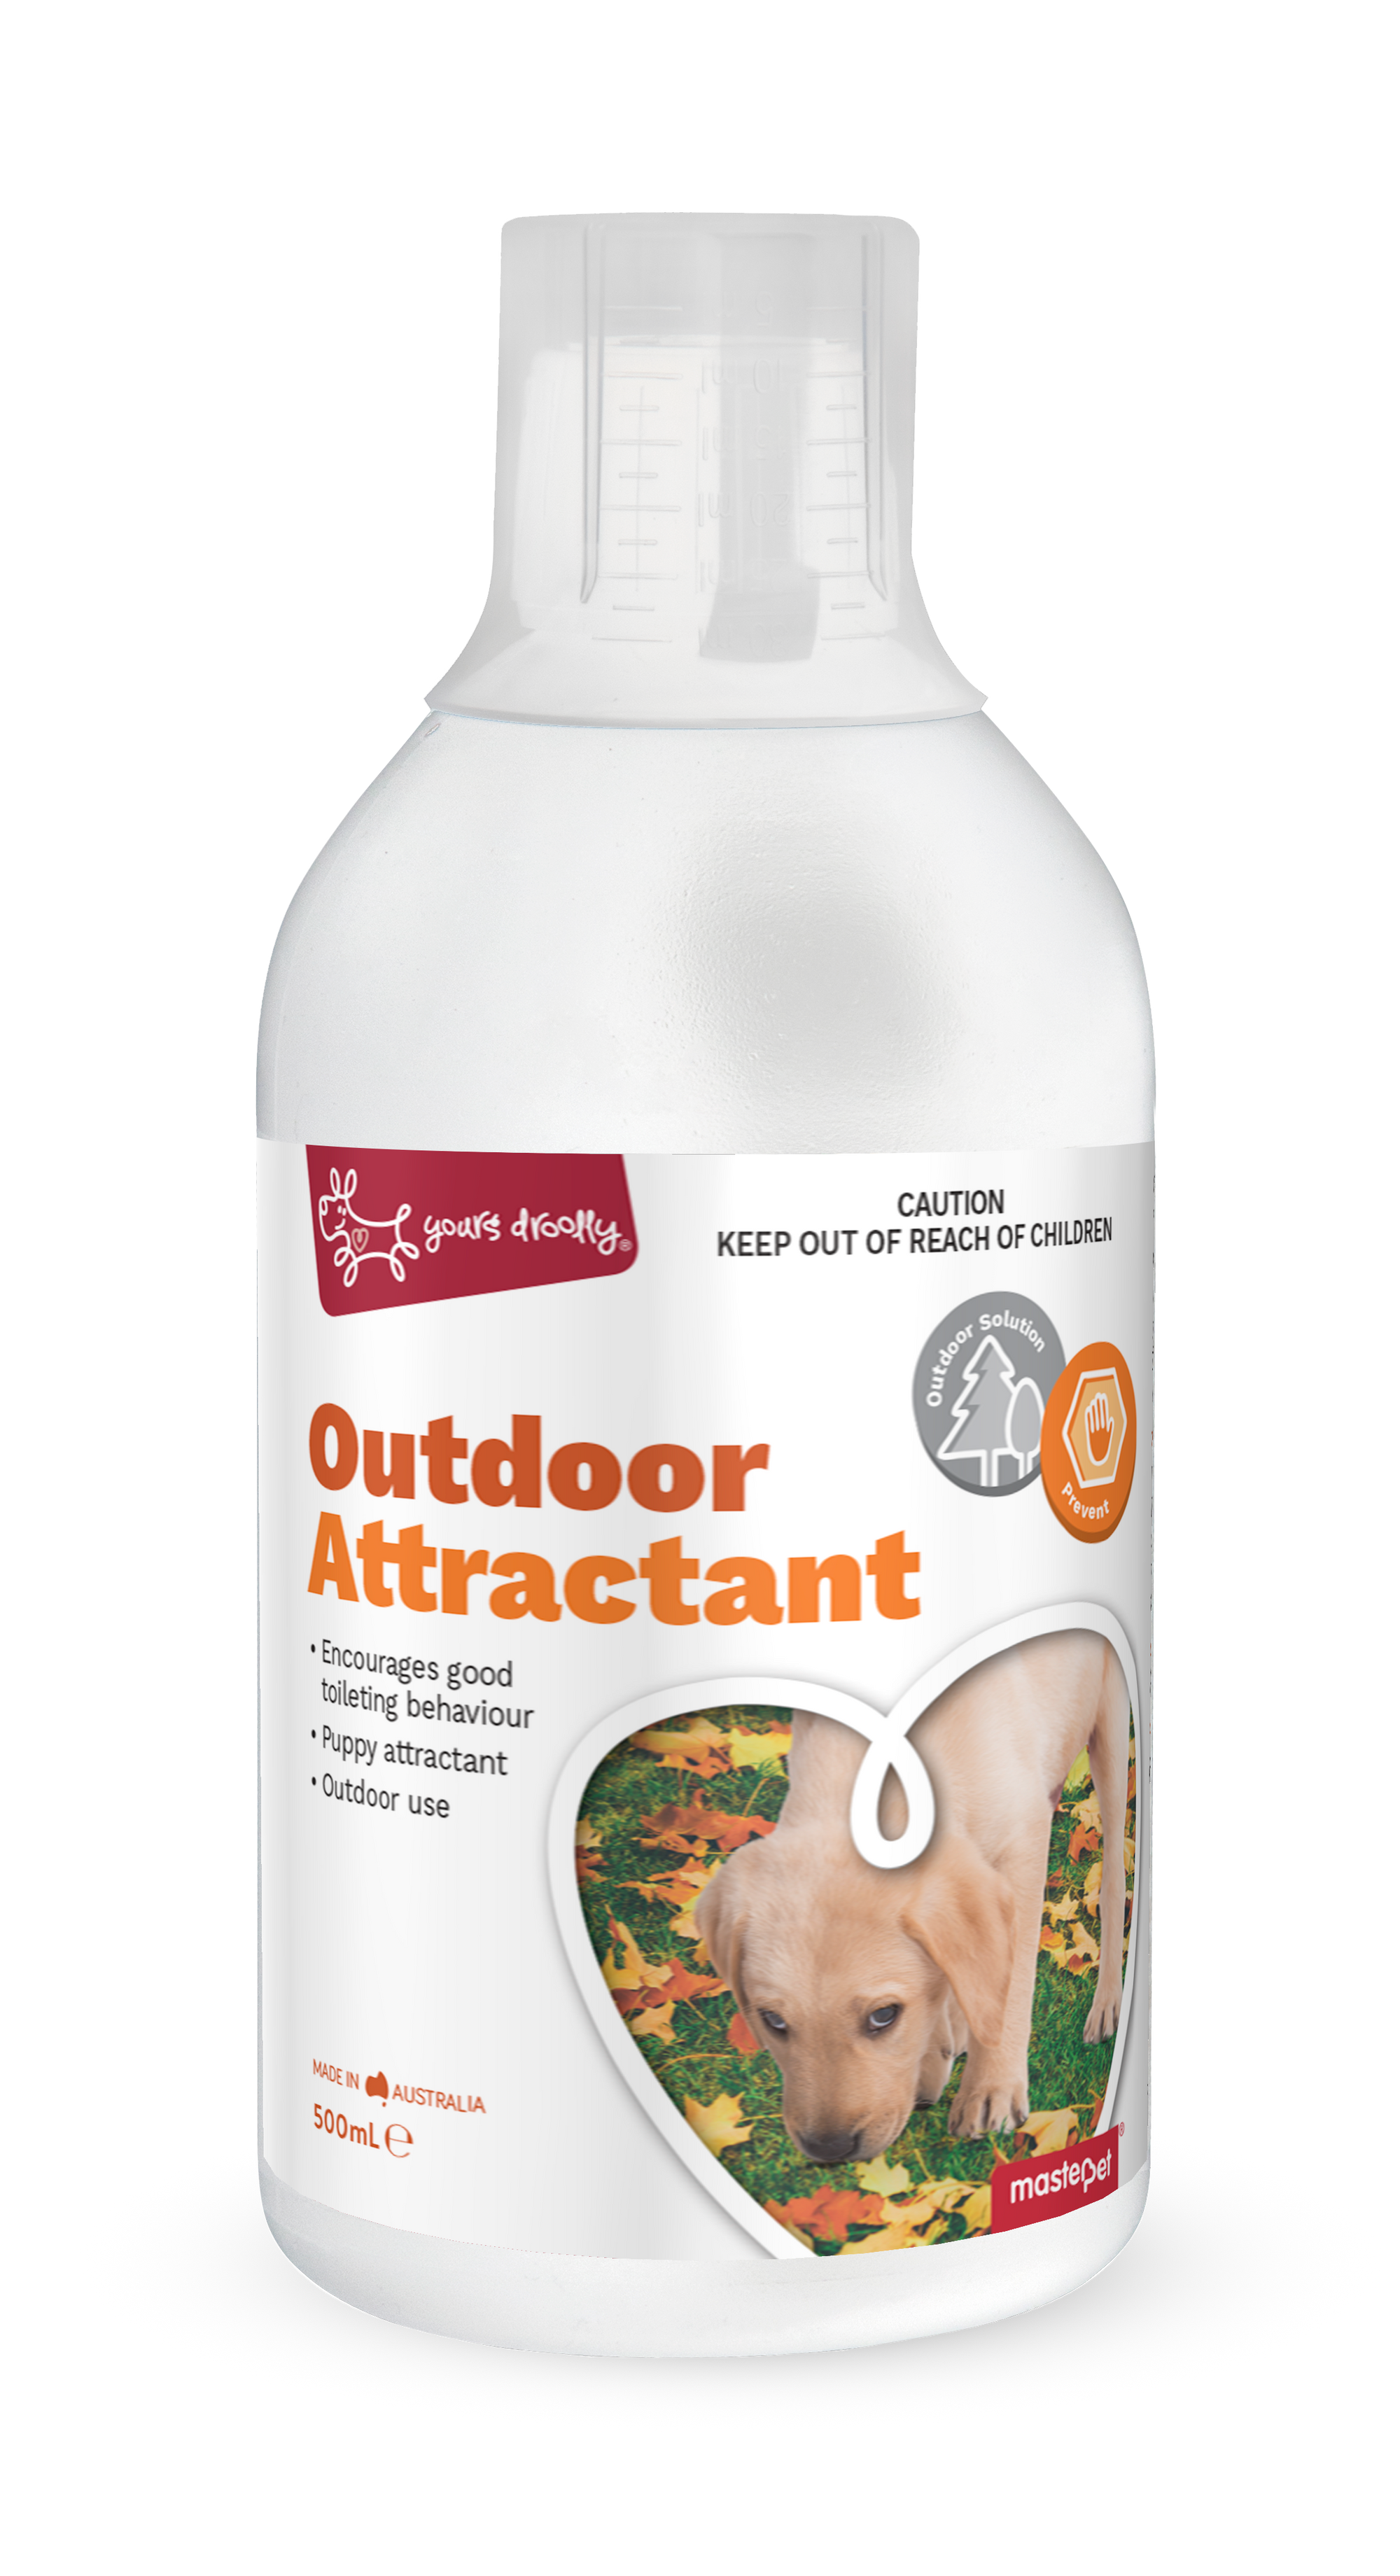 Yours Droolly Outdoor Attractant 500ml - RSPCA VIC